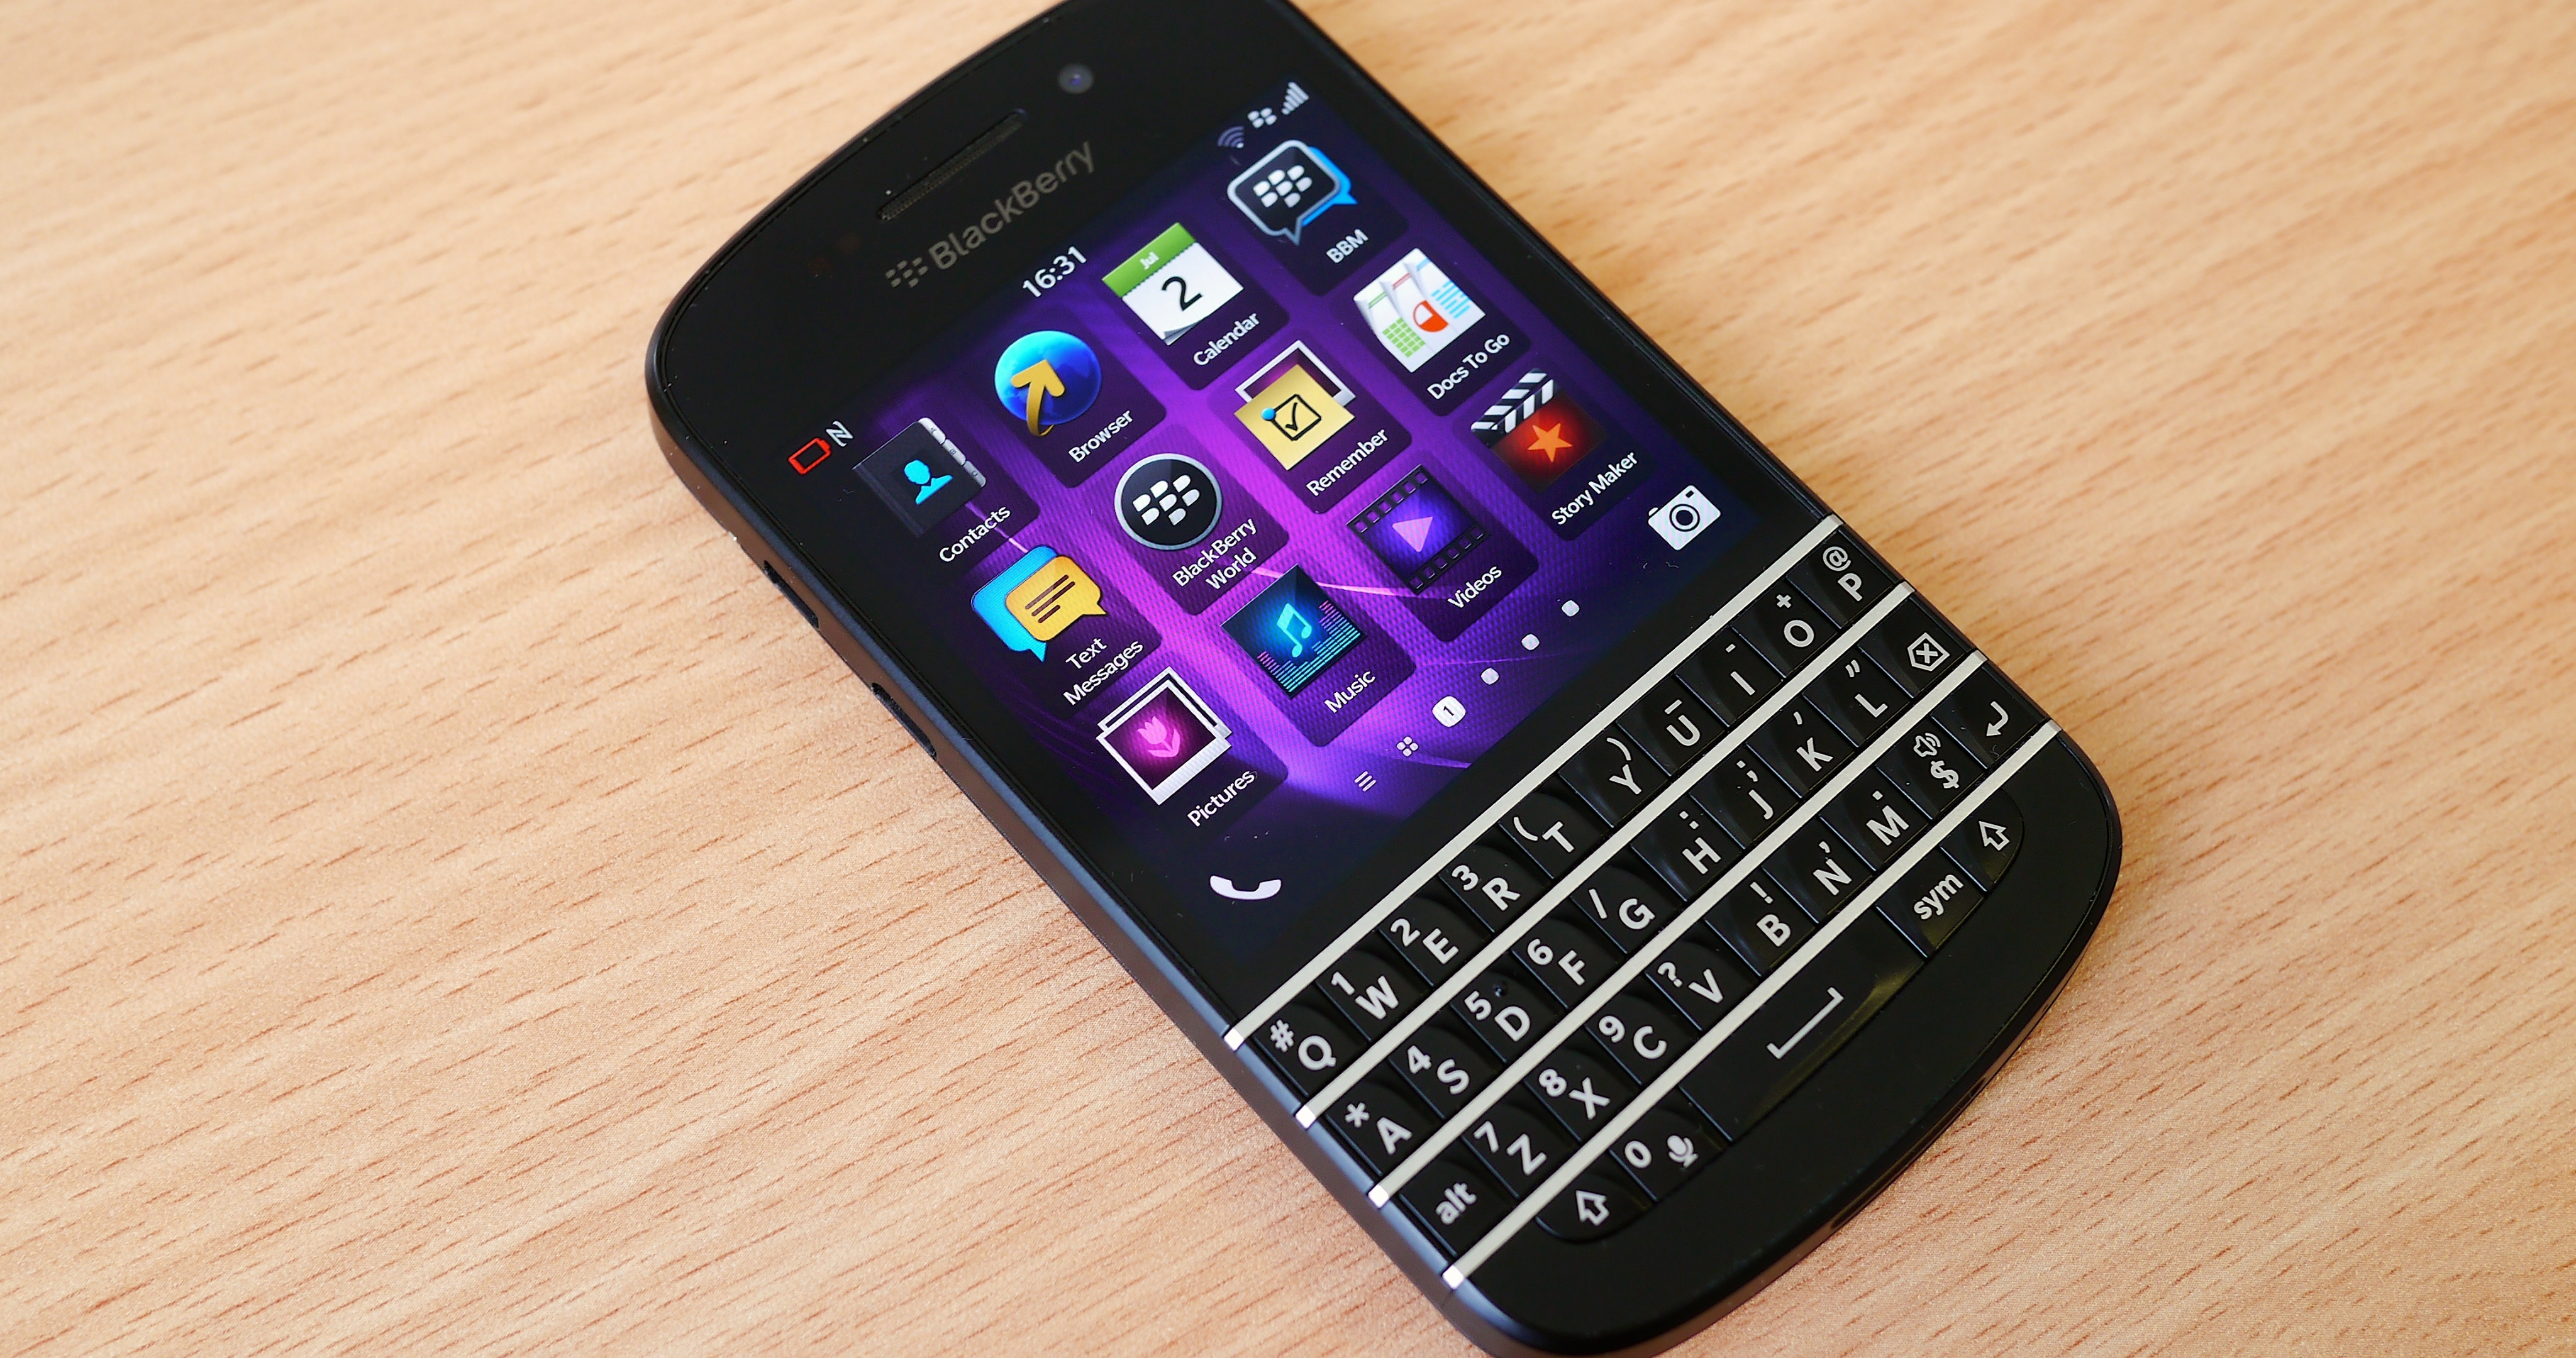 The 5G BlackBerry is officially dead as OnwardMobility goes out of business